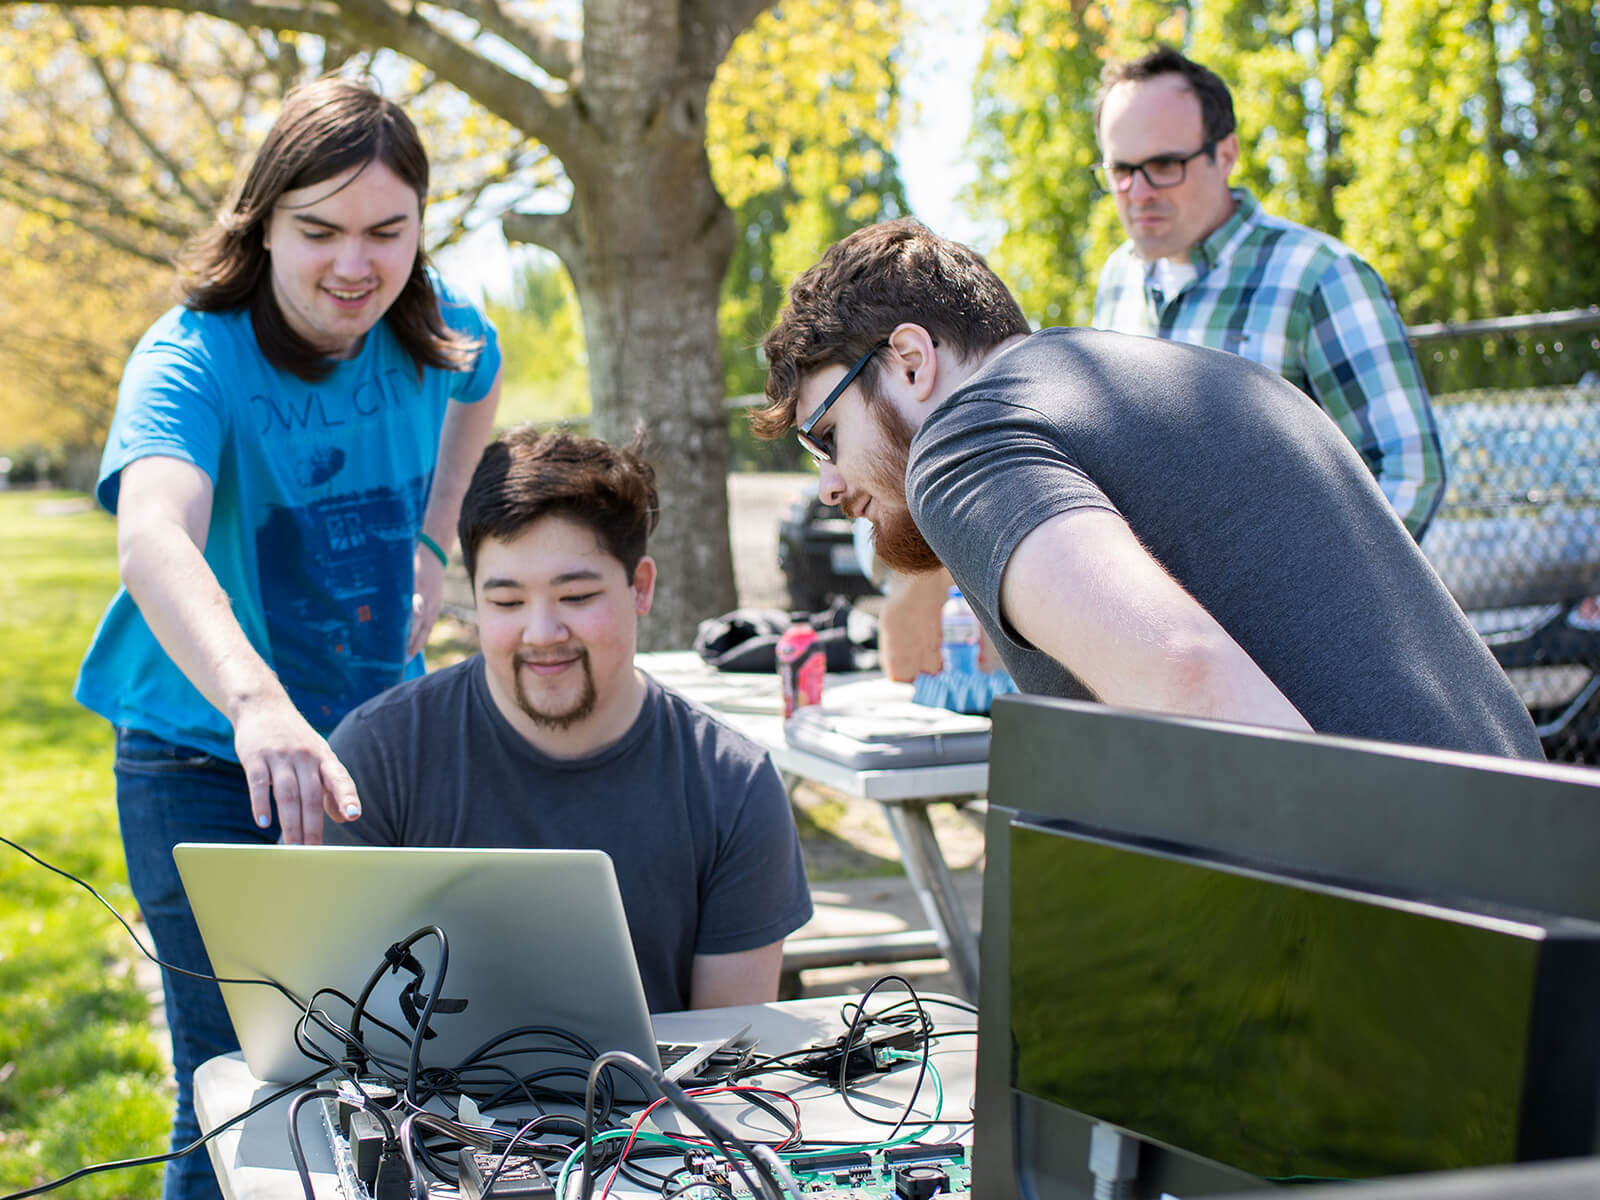 Two students look over the shoulder of another at a laptop computer and radar system set up outdoors in a park.